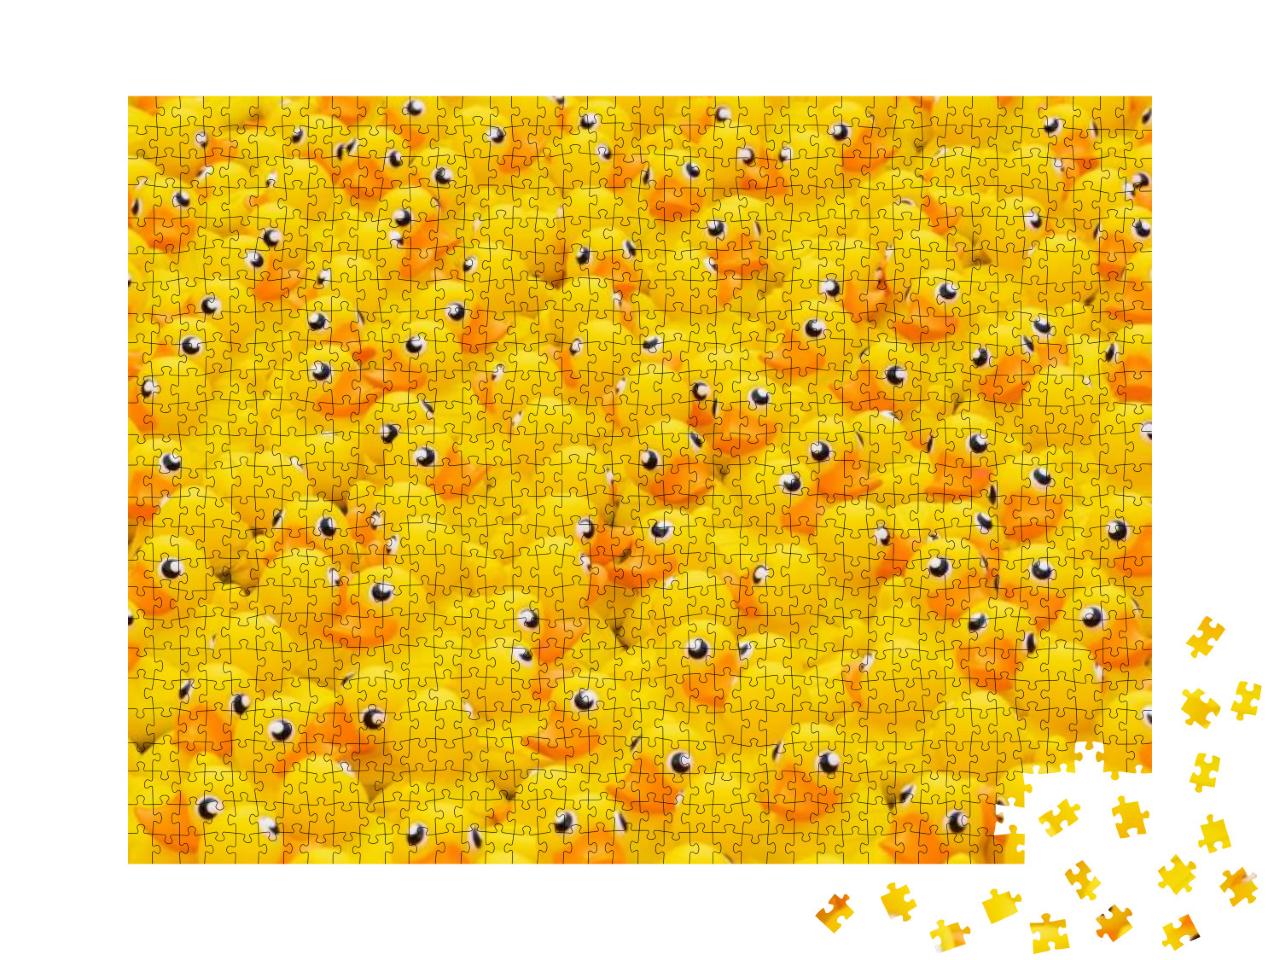 Yellow Toy Duck Floating in the Pool... Jigsaw Puzzle with 1000 pieces